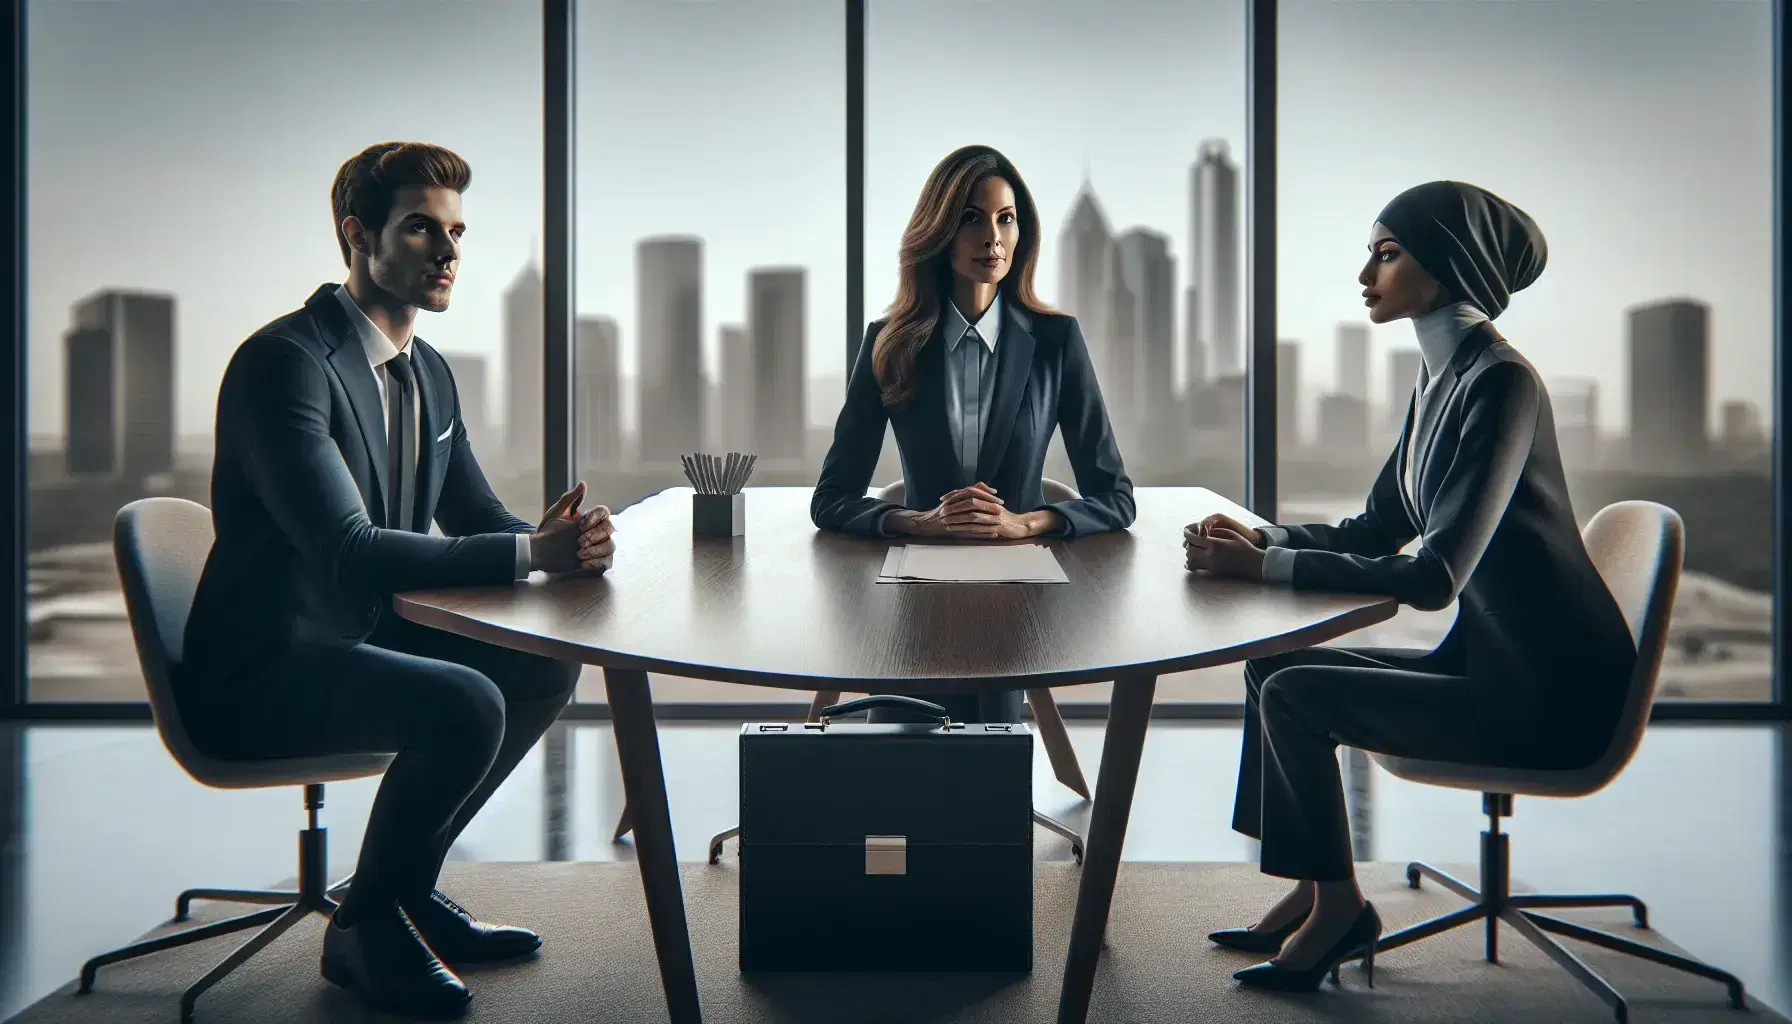 Three professionals in a meeting, with a woman HR in the center, a man and another woman candidates on sides, at a wooden table in an office with city view.